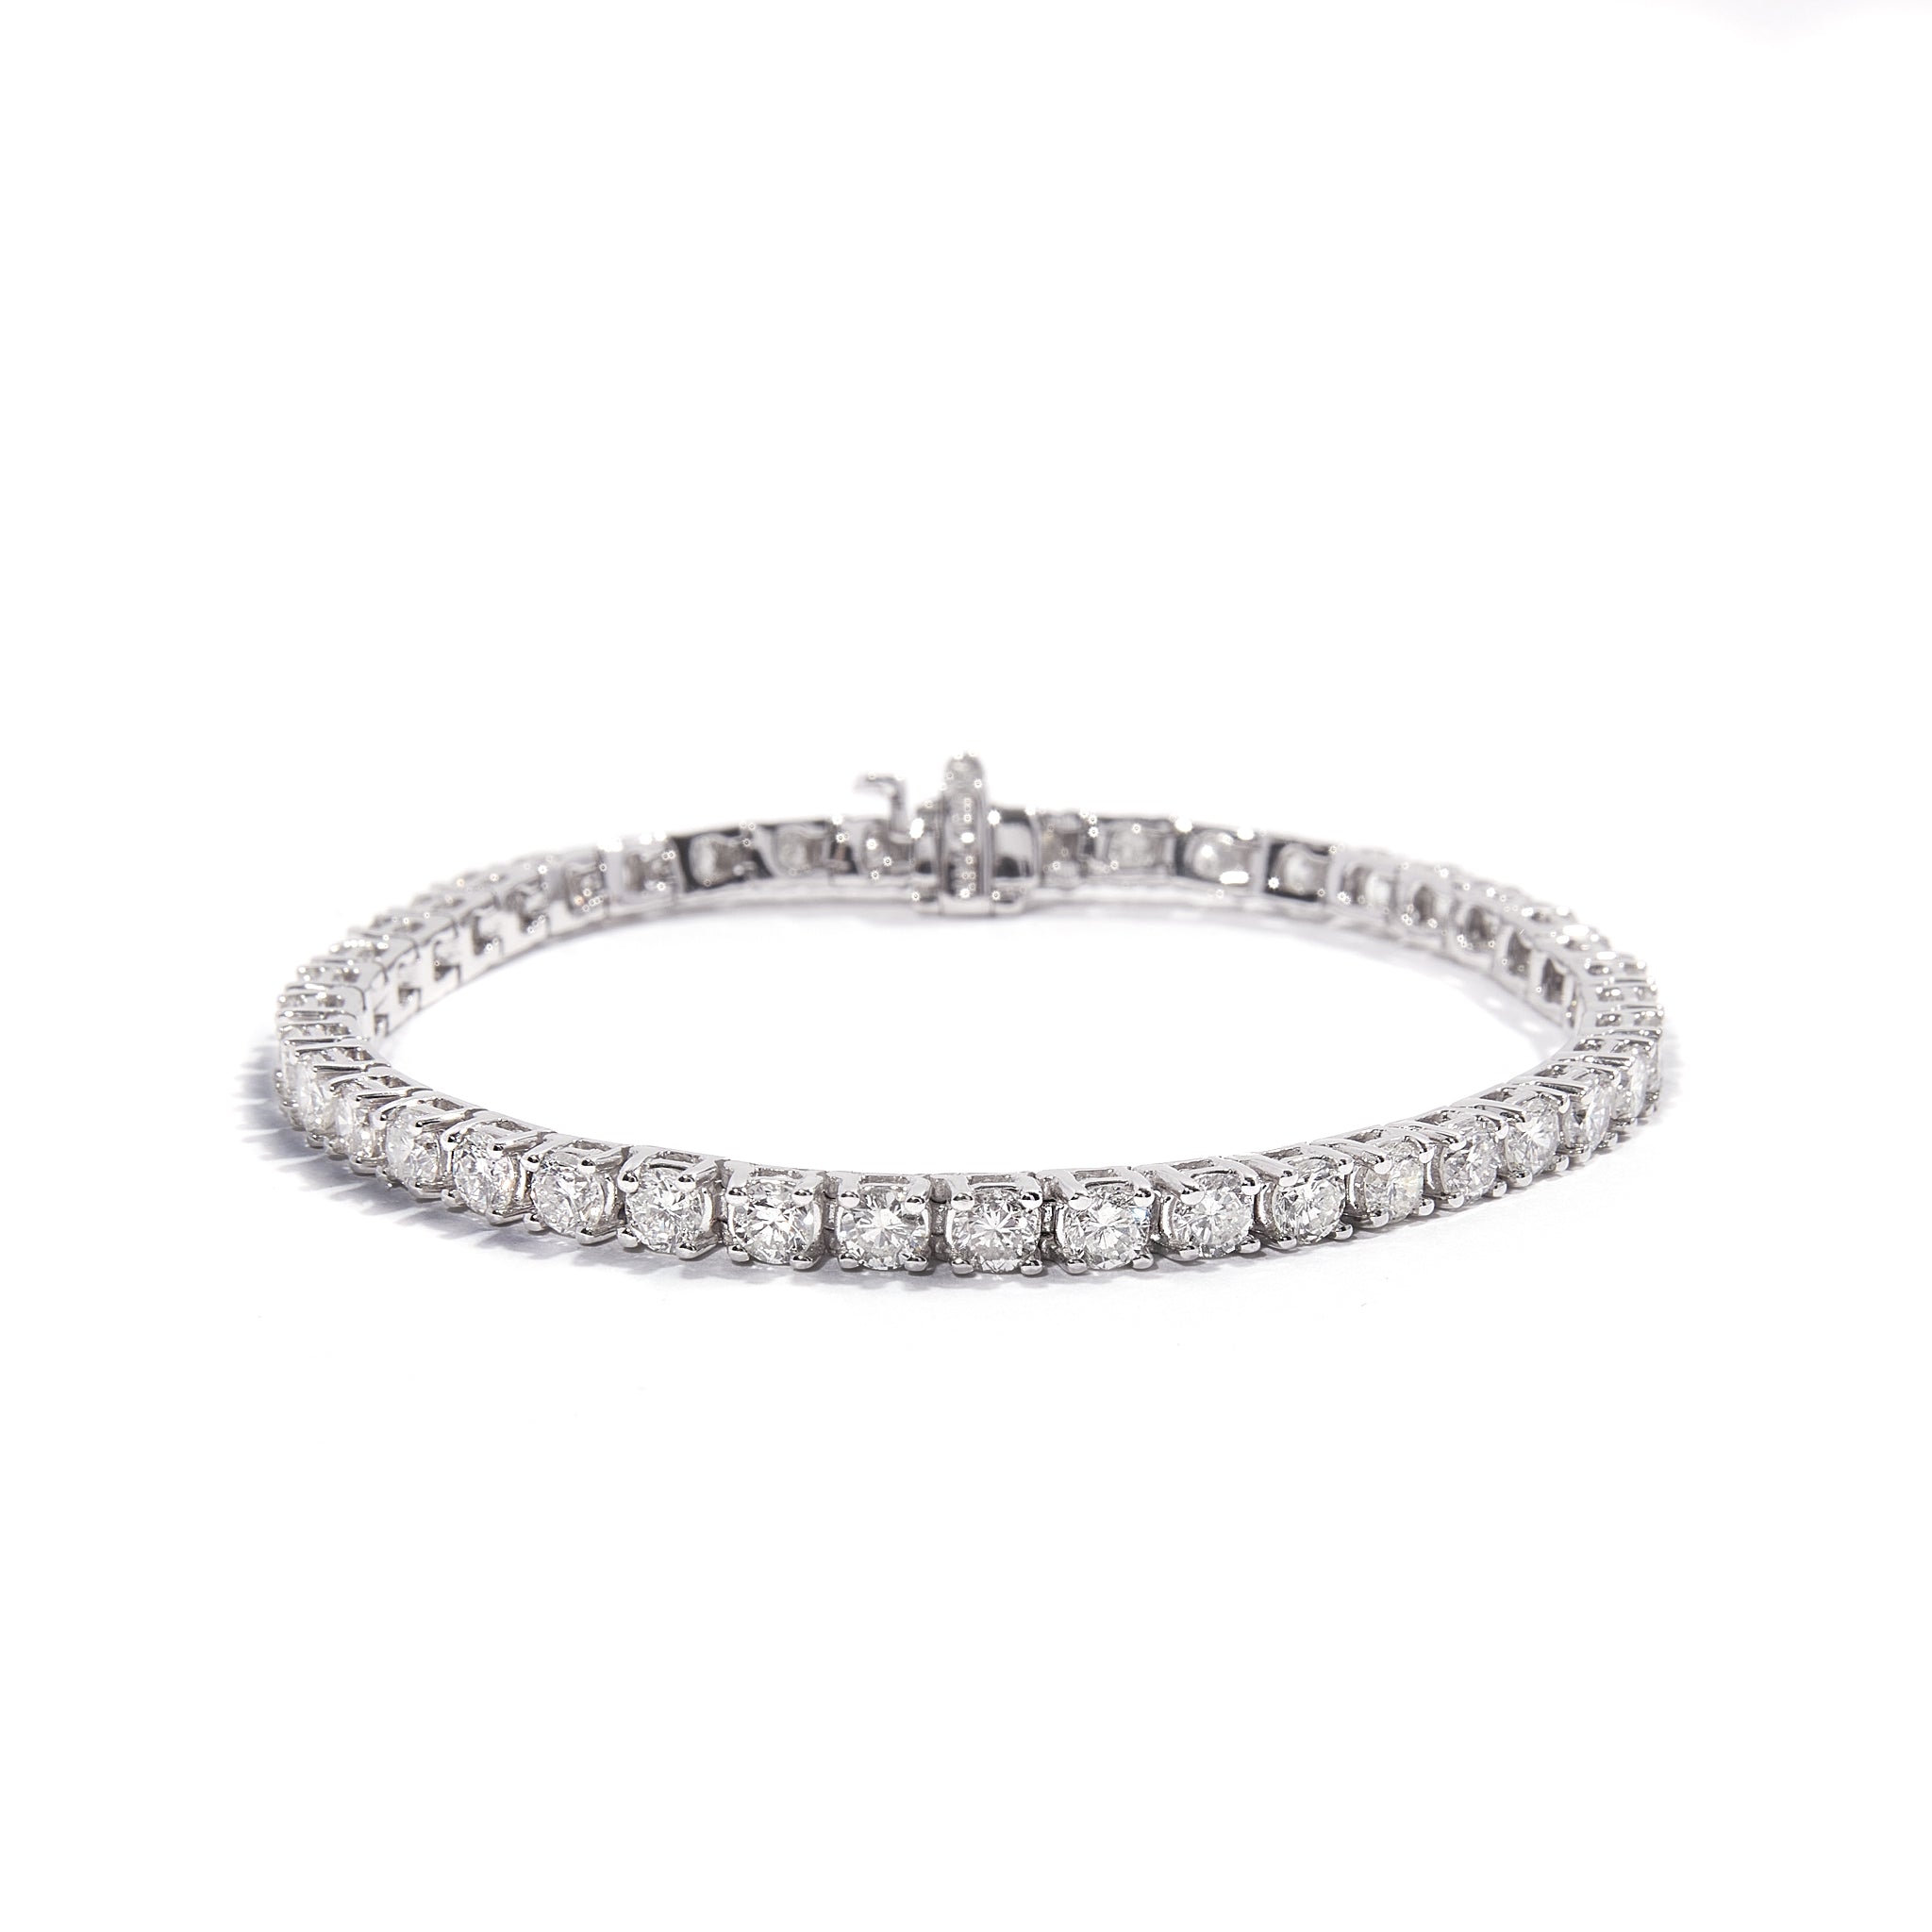 Exquisite 14ct White Gold Diamond Tennis Bracelet adorned with natural diamonds, crafted with precision. Crafted in 14 carat white gold. Features a total of 7.15 carats of diamonds. Weighs 13.73 grams